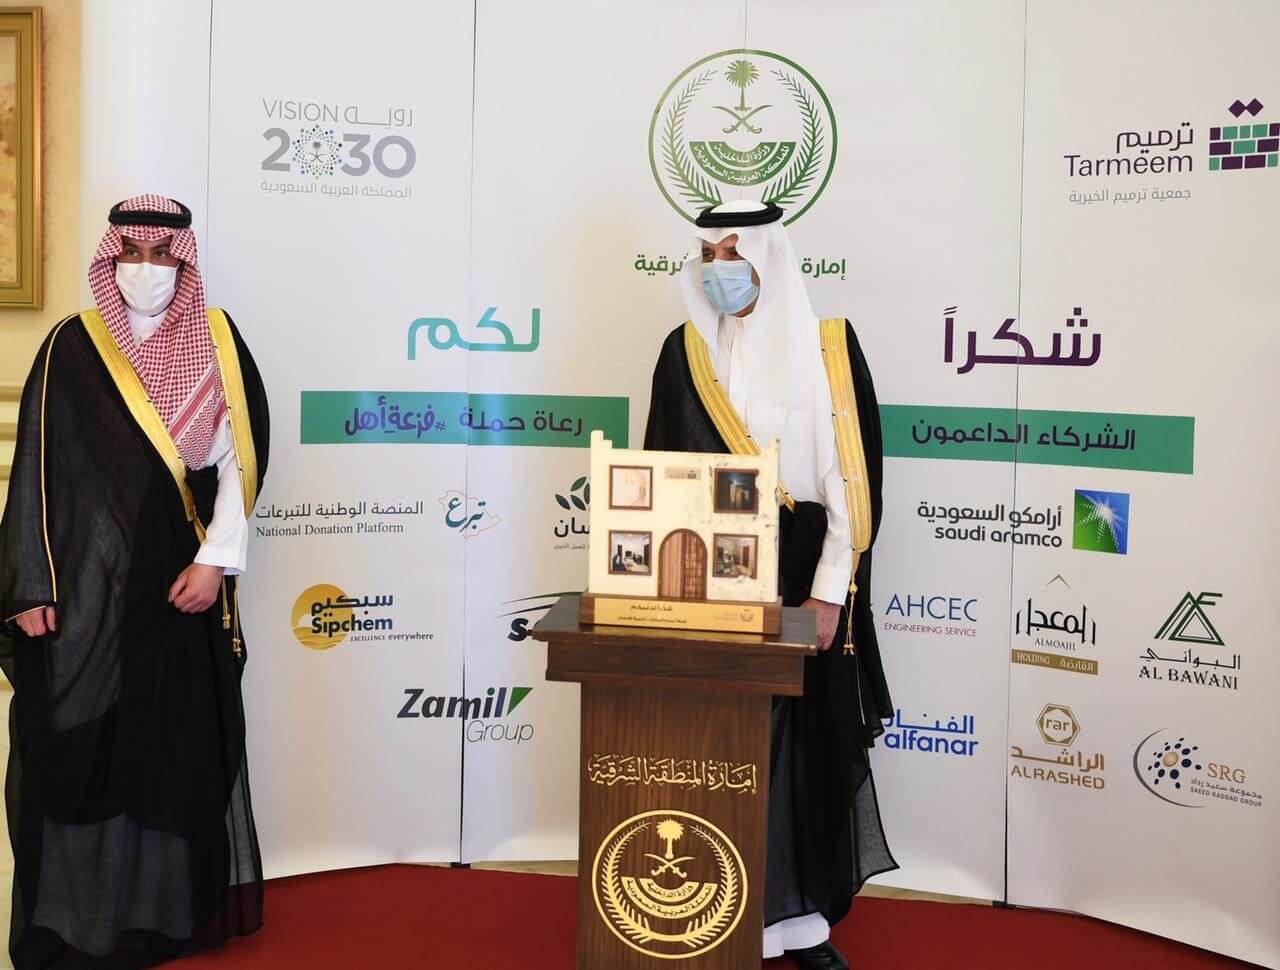 Zamil Group sponsoring the “Fazaa Ahl” campaign